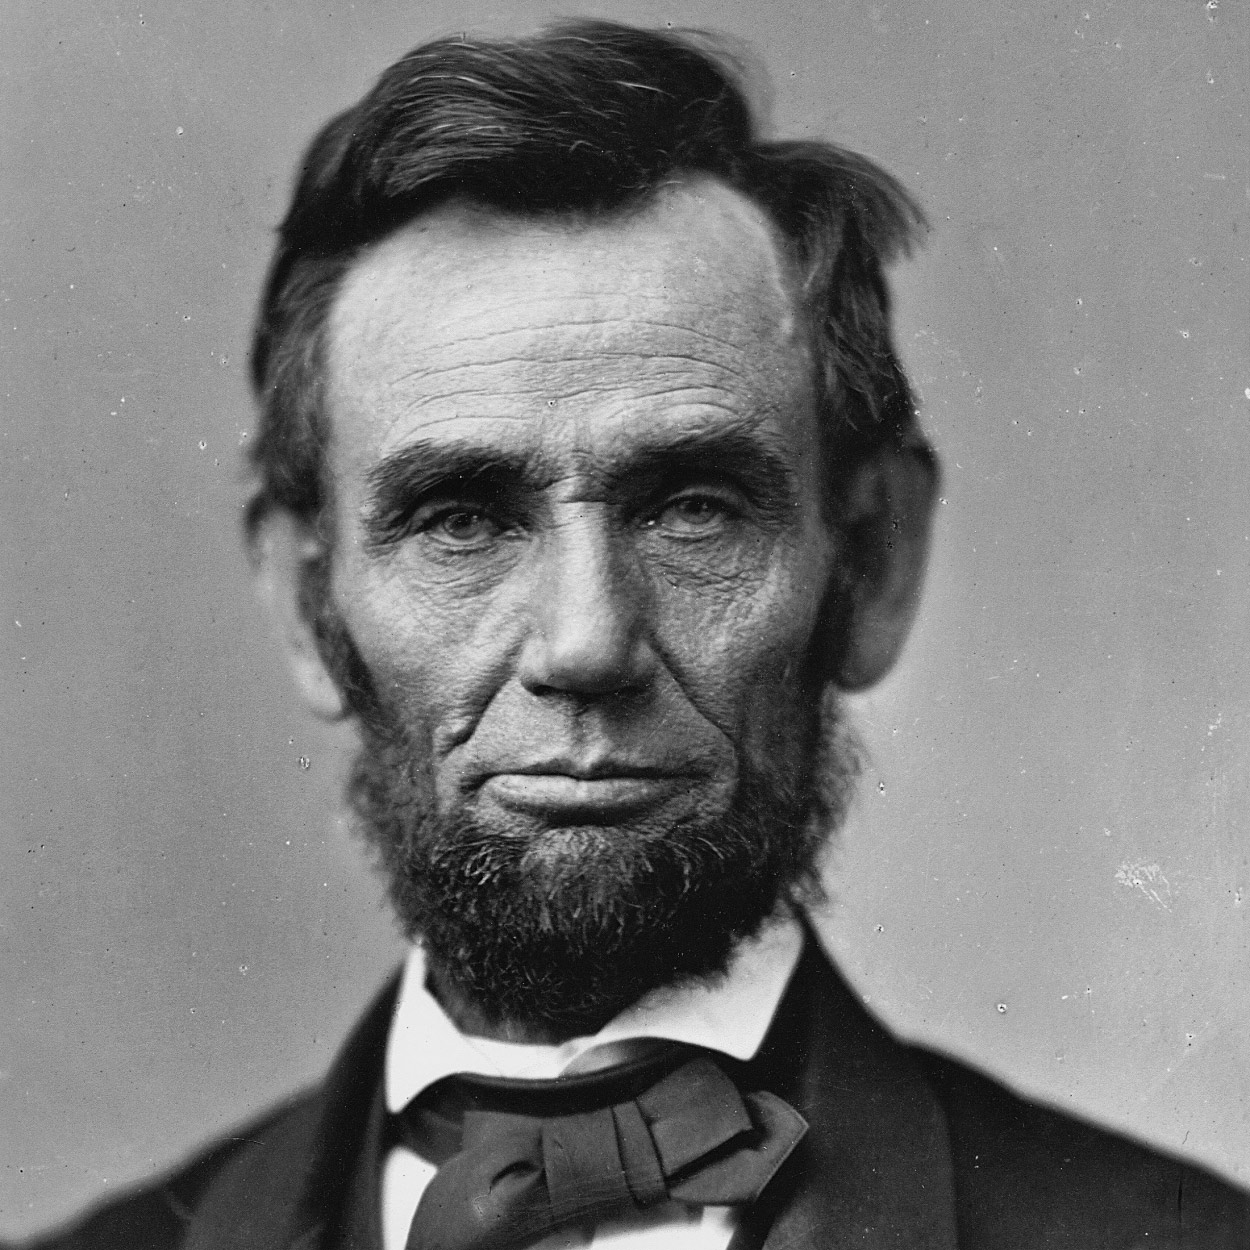 Portrait of Abraham Lincoln, the 16th President of the United States